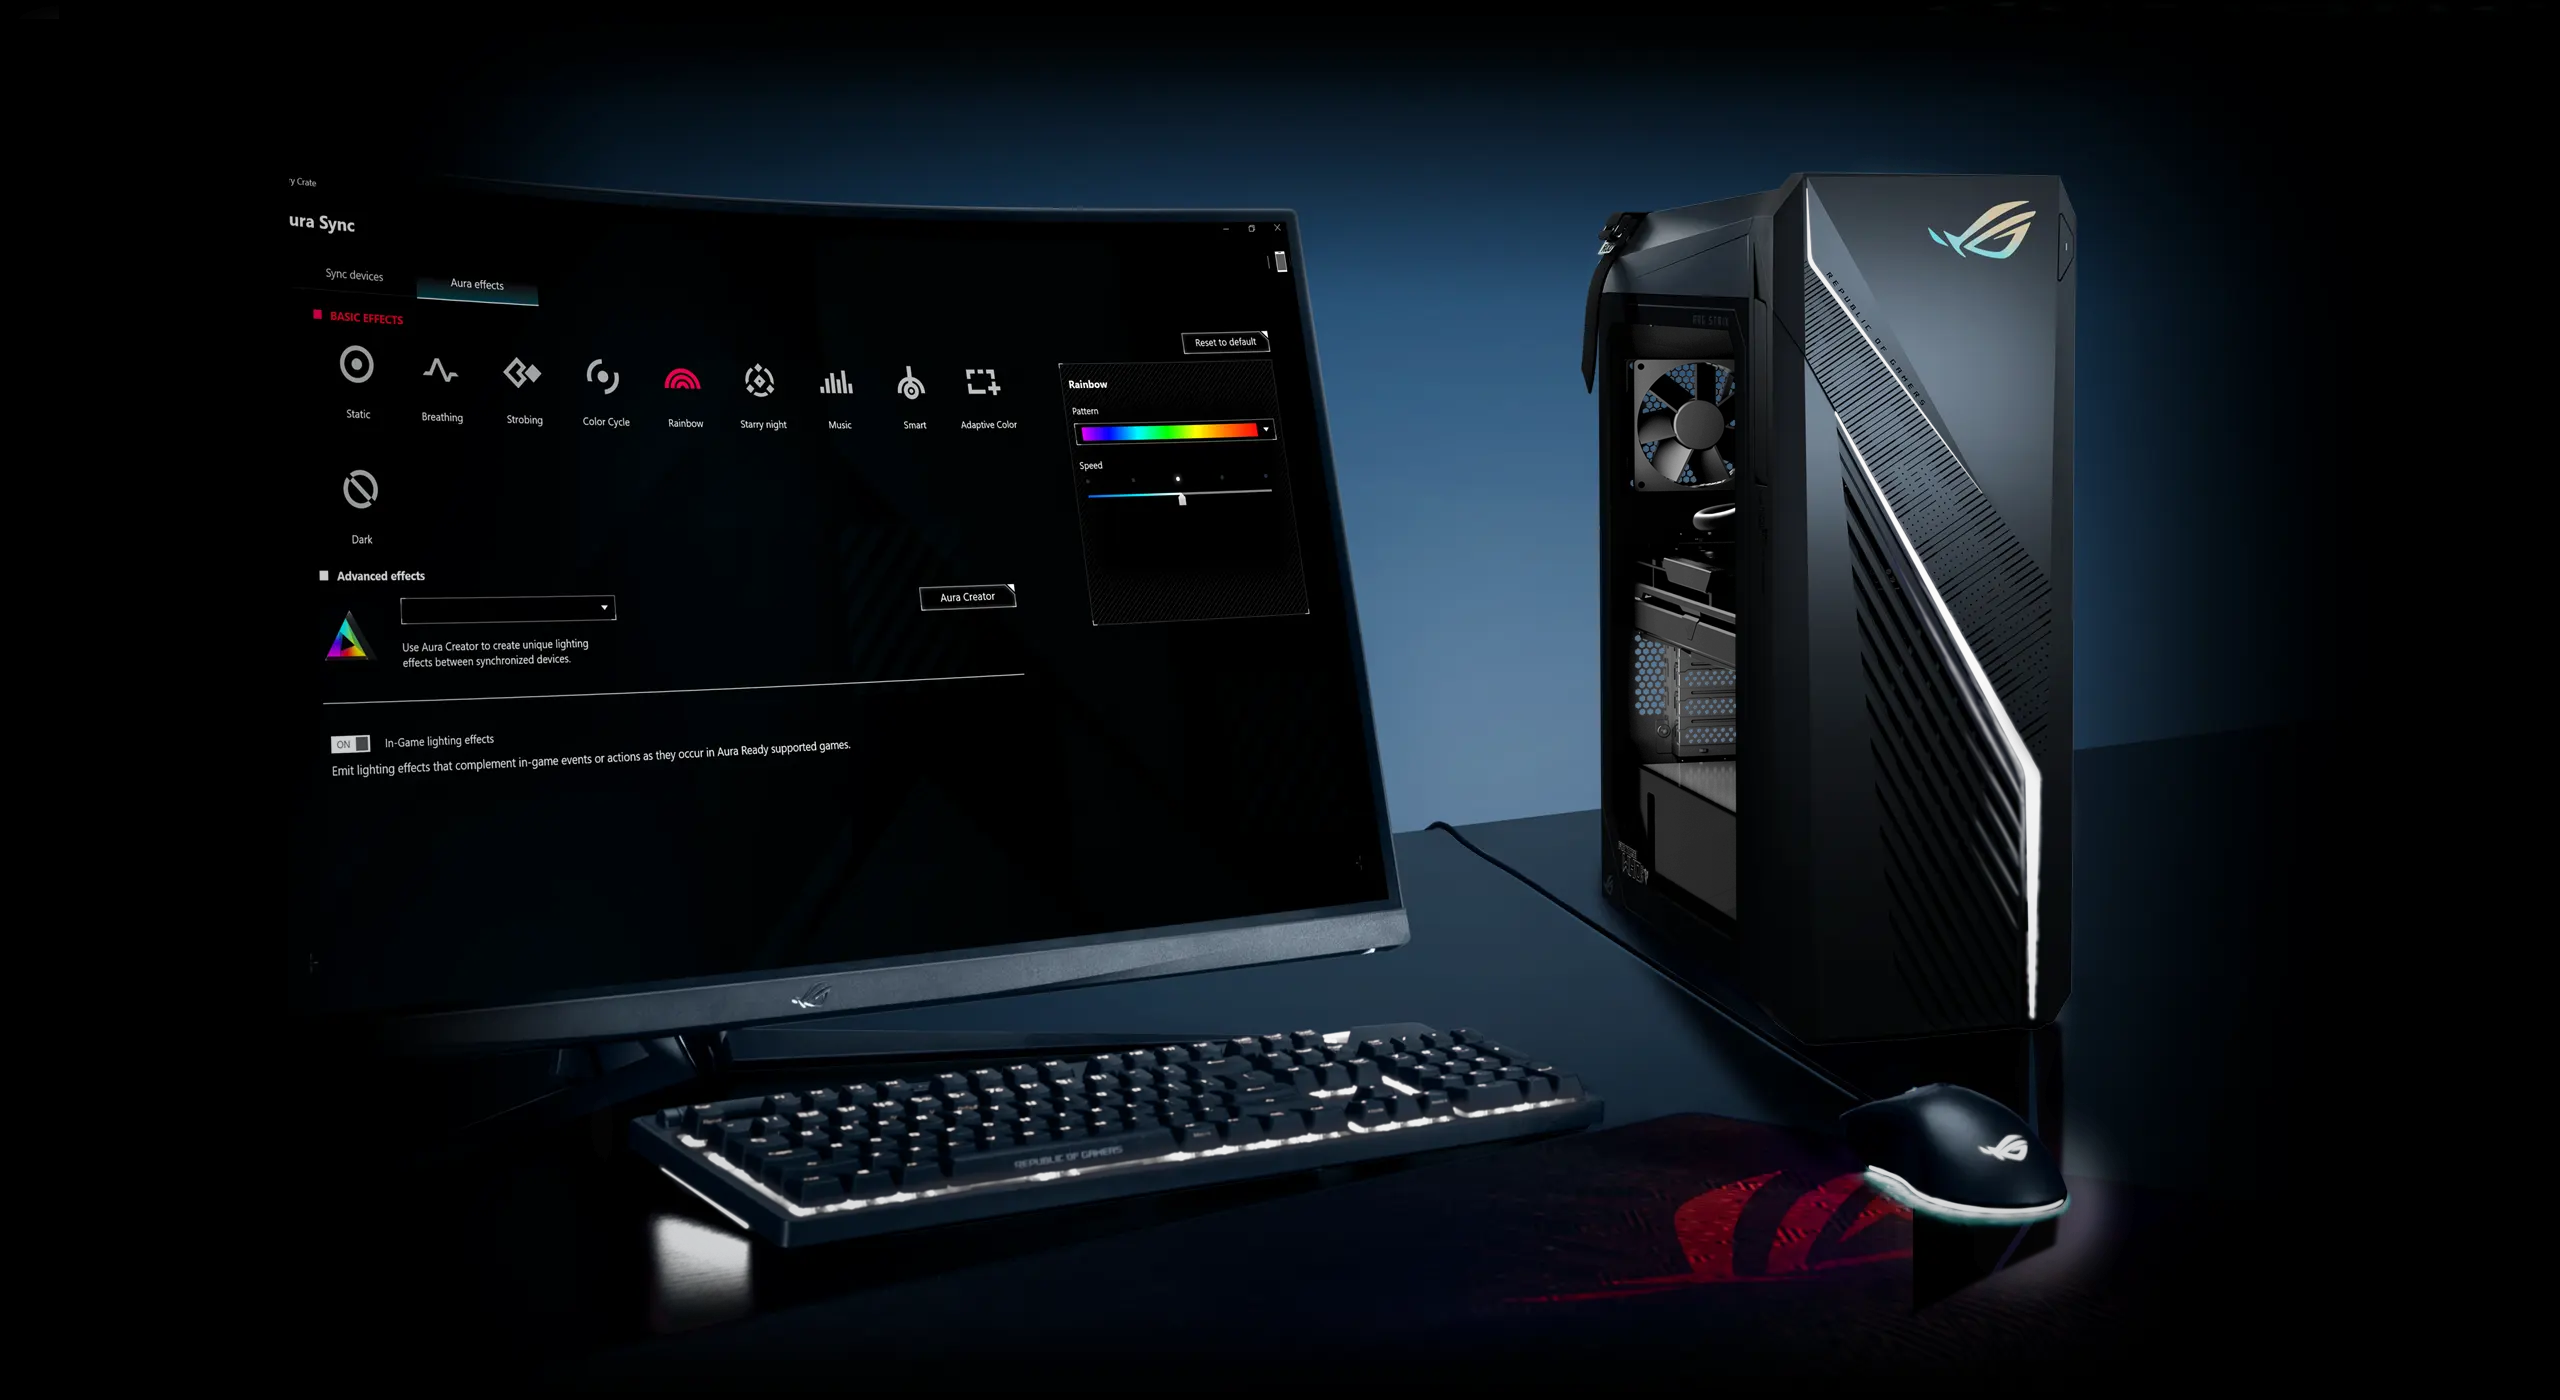 The ROG G16 sitting on a desk next to a gaming monitor, keyboard, and mouse.